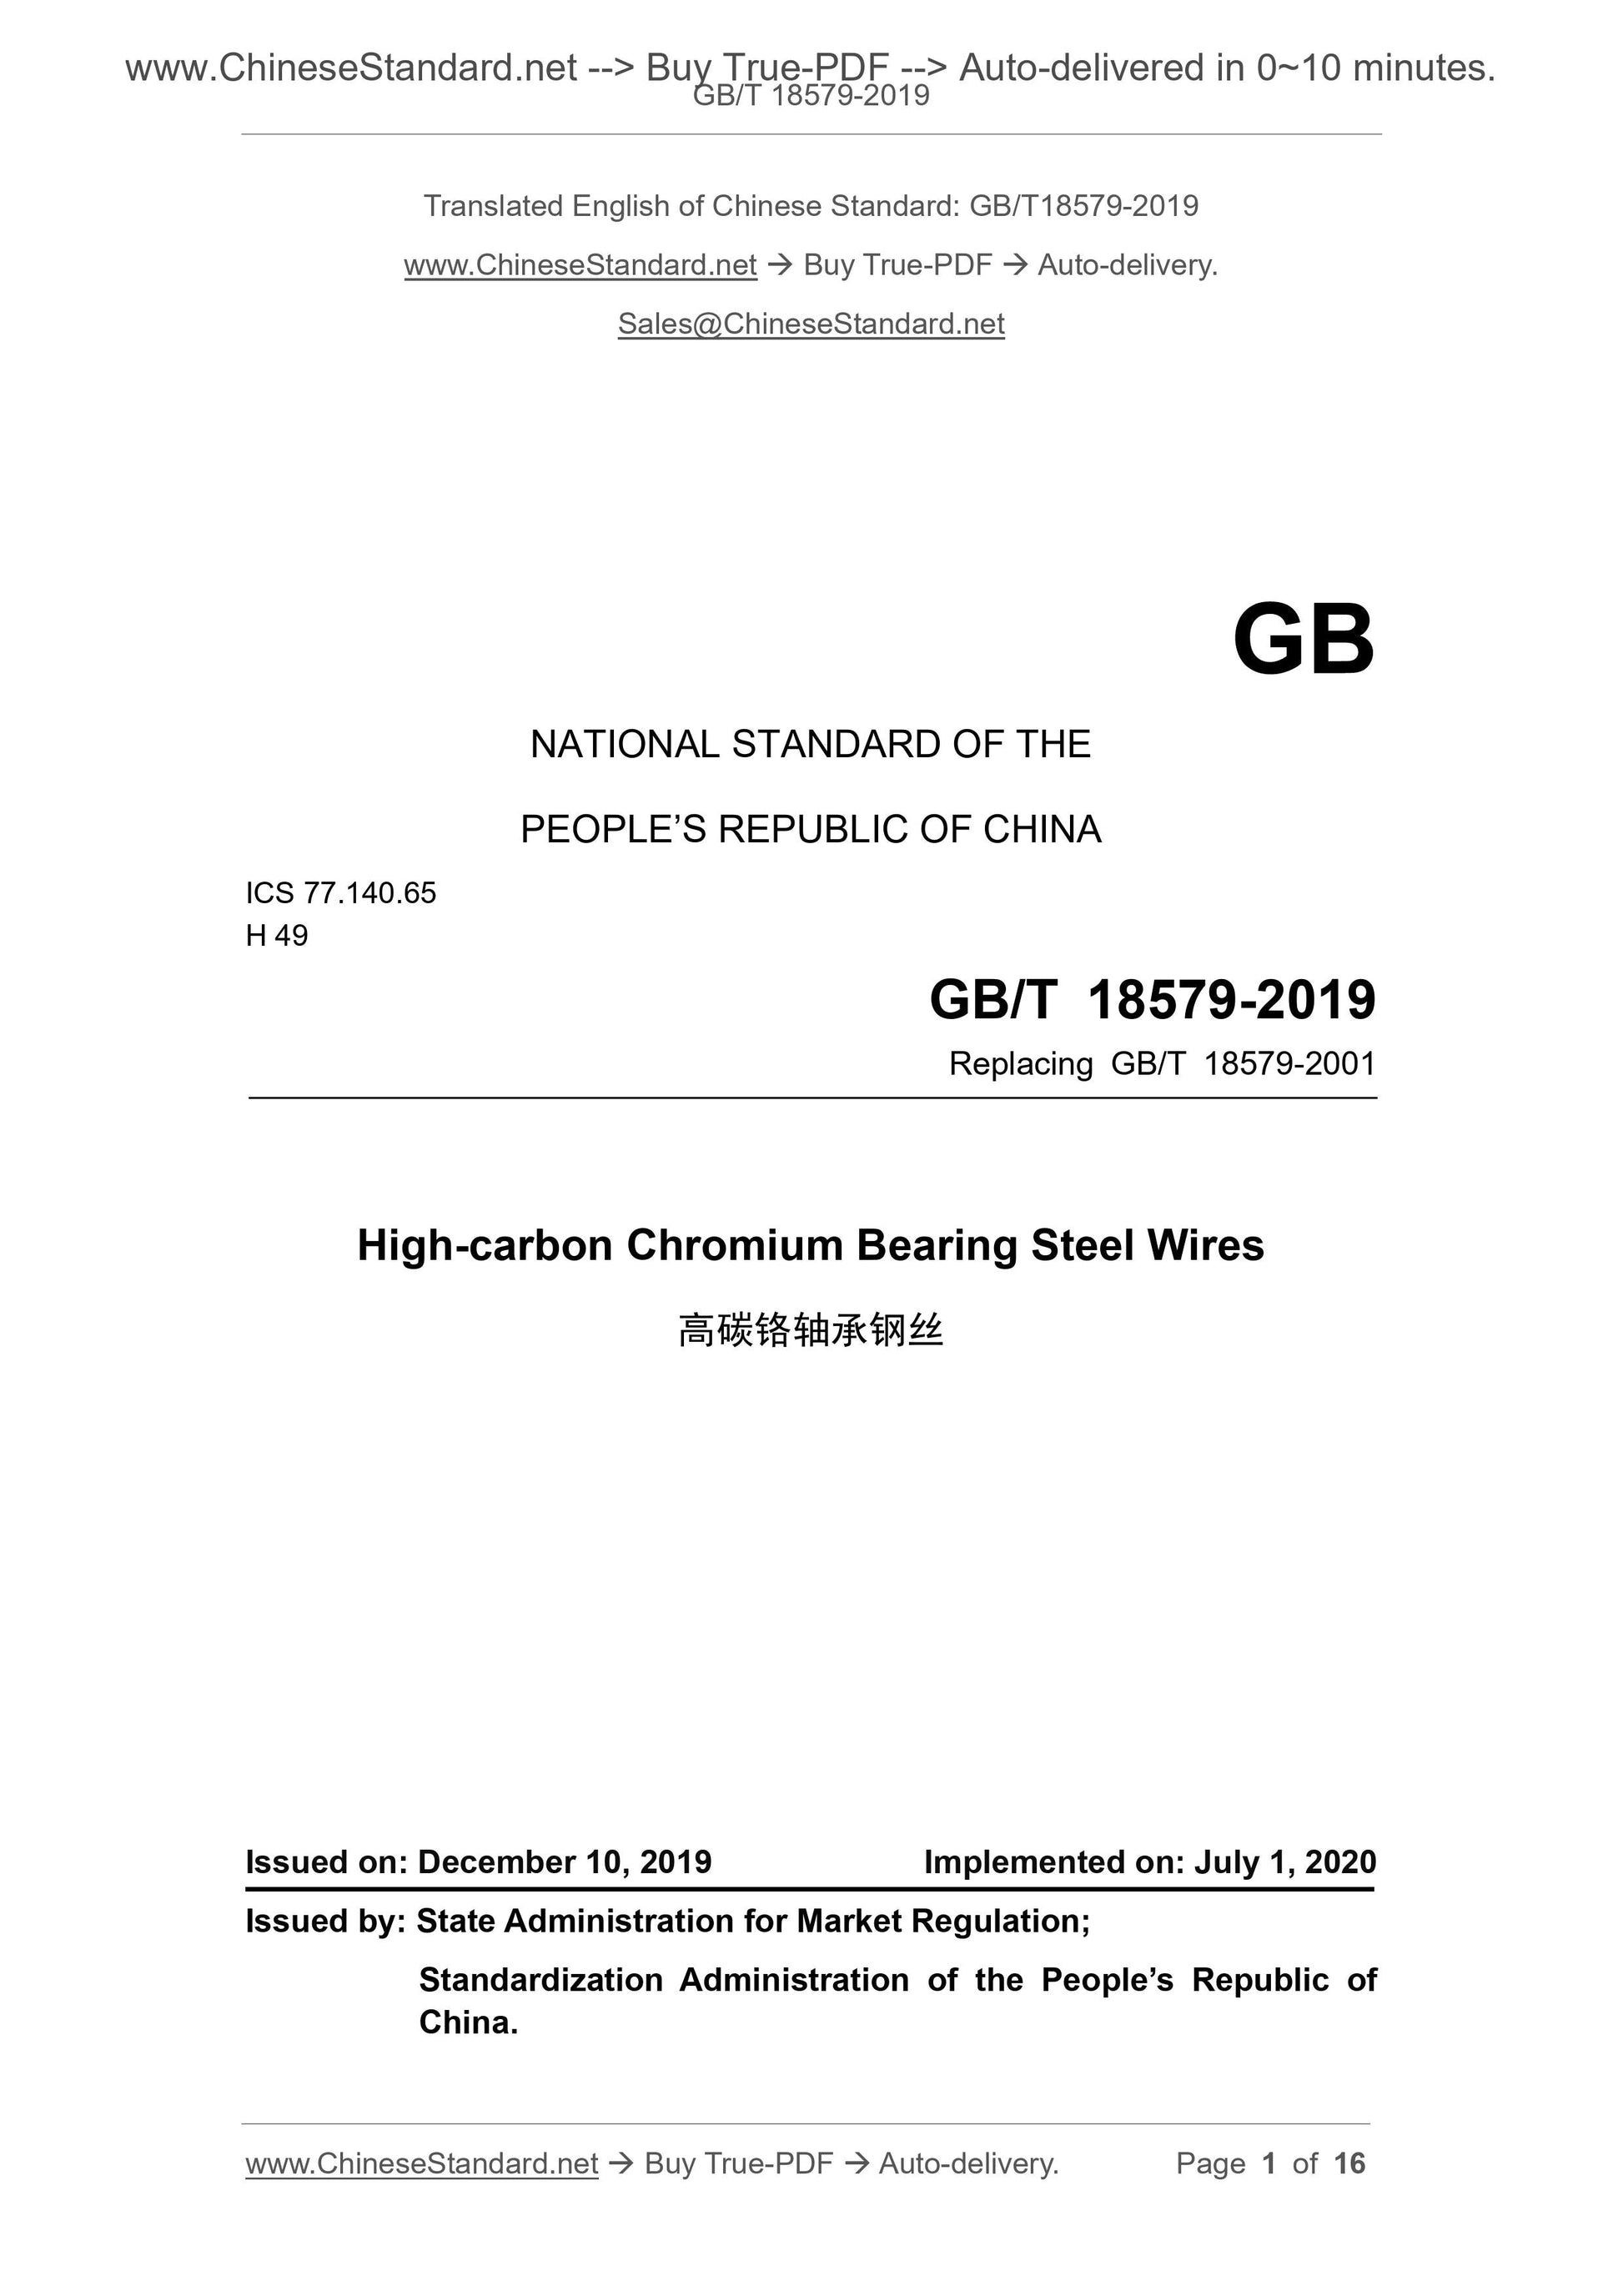 GB/T 18579-2019 Page 1